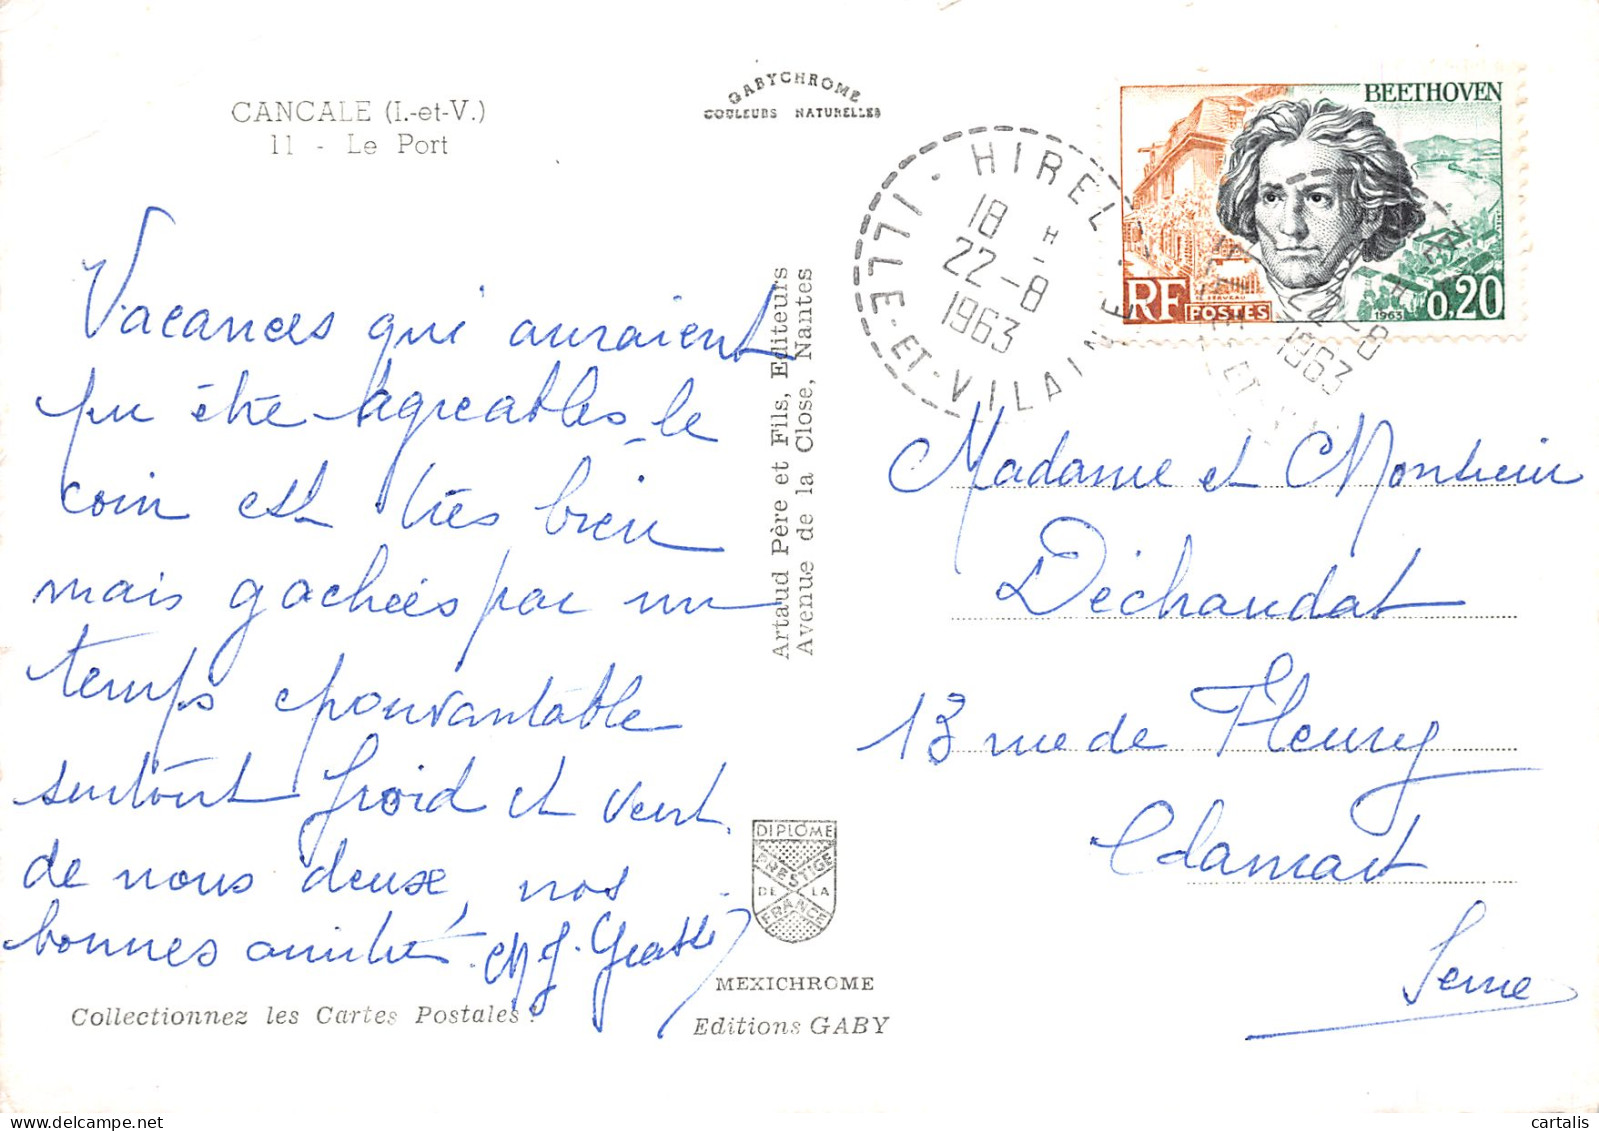 35-CANCALE-N° 4448-D/0191 - Cancale